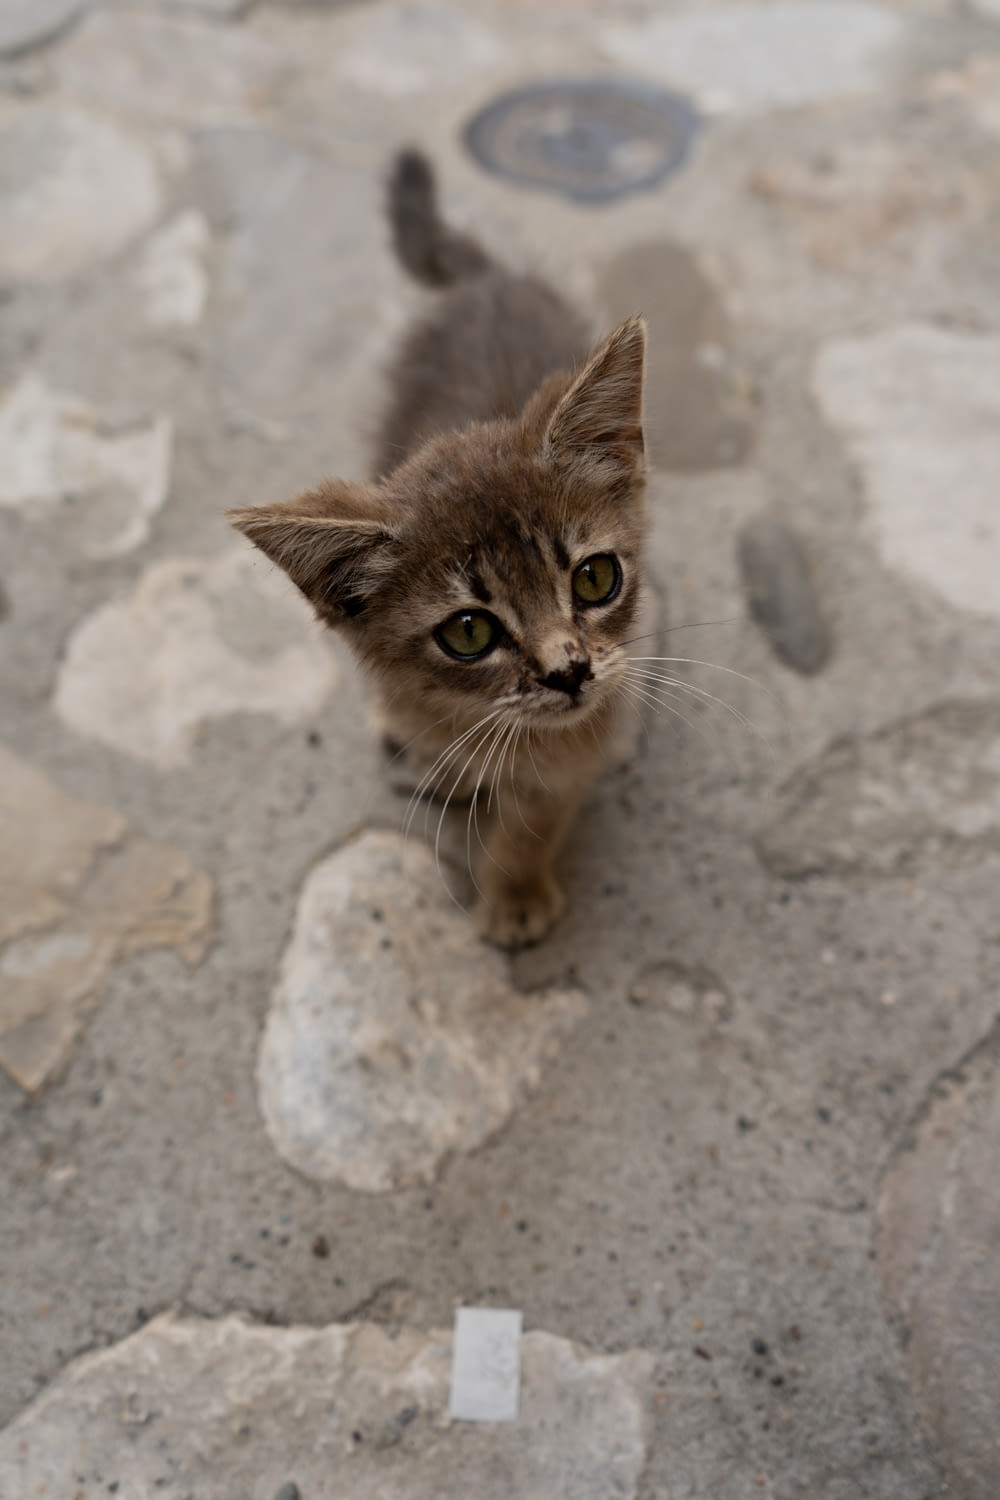 a small kitten standing on top of a stone floor